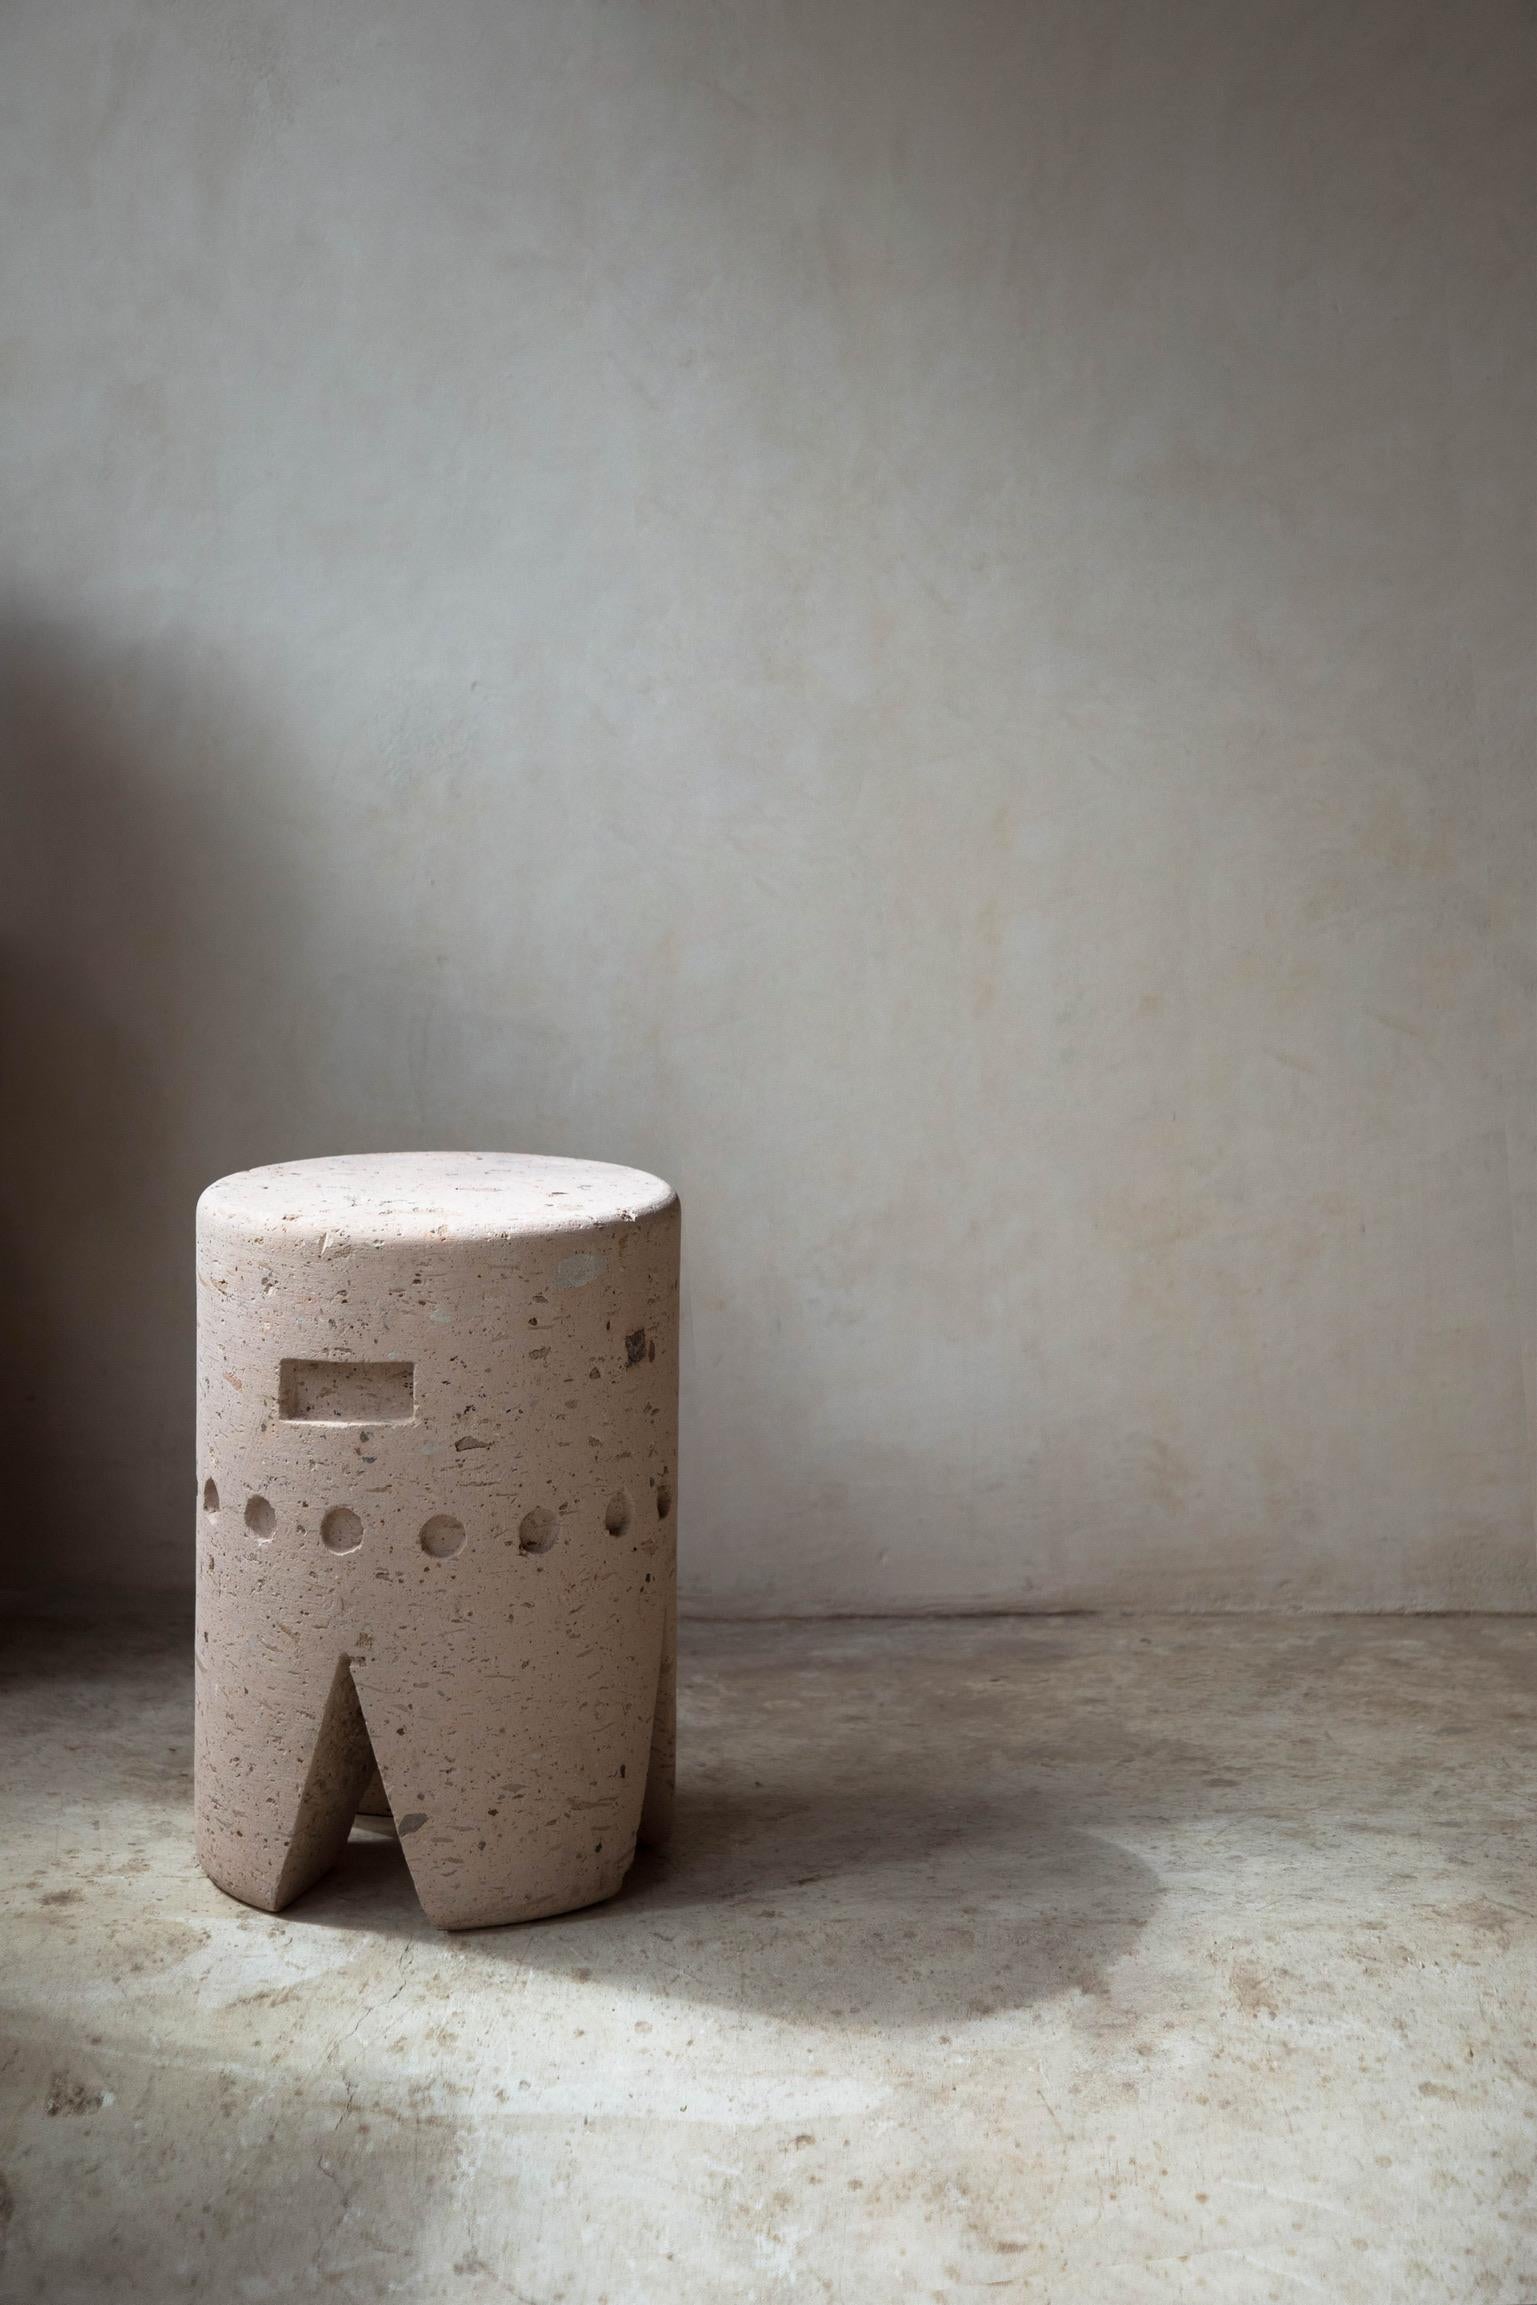 Pink stone totem 01 by Daniel Orozco
Material: natural Cantera.
Dimensions: D 30 x H 45 cm

Natural Cantera stone Totem.

Daniel Orozco Estudio
We are an inclusive interior design estudio, who love to work with fabrics and natural textiles in makes